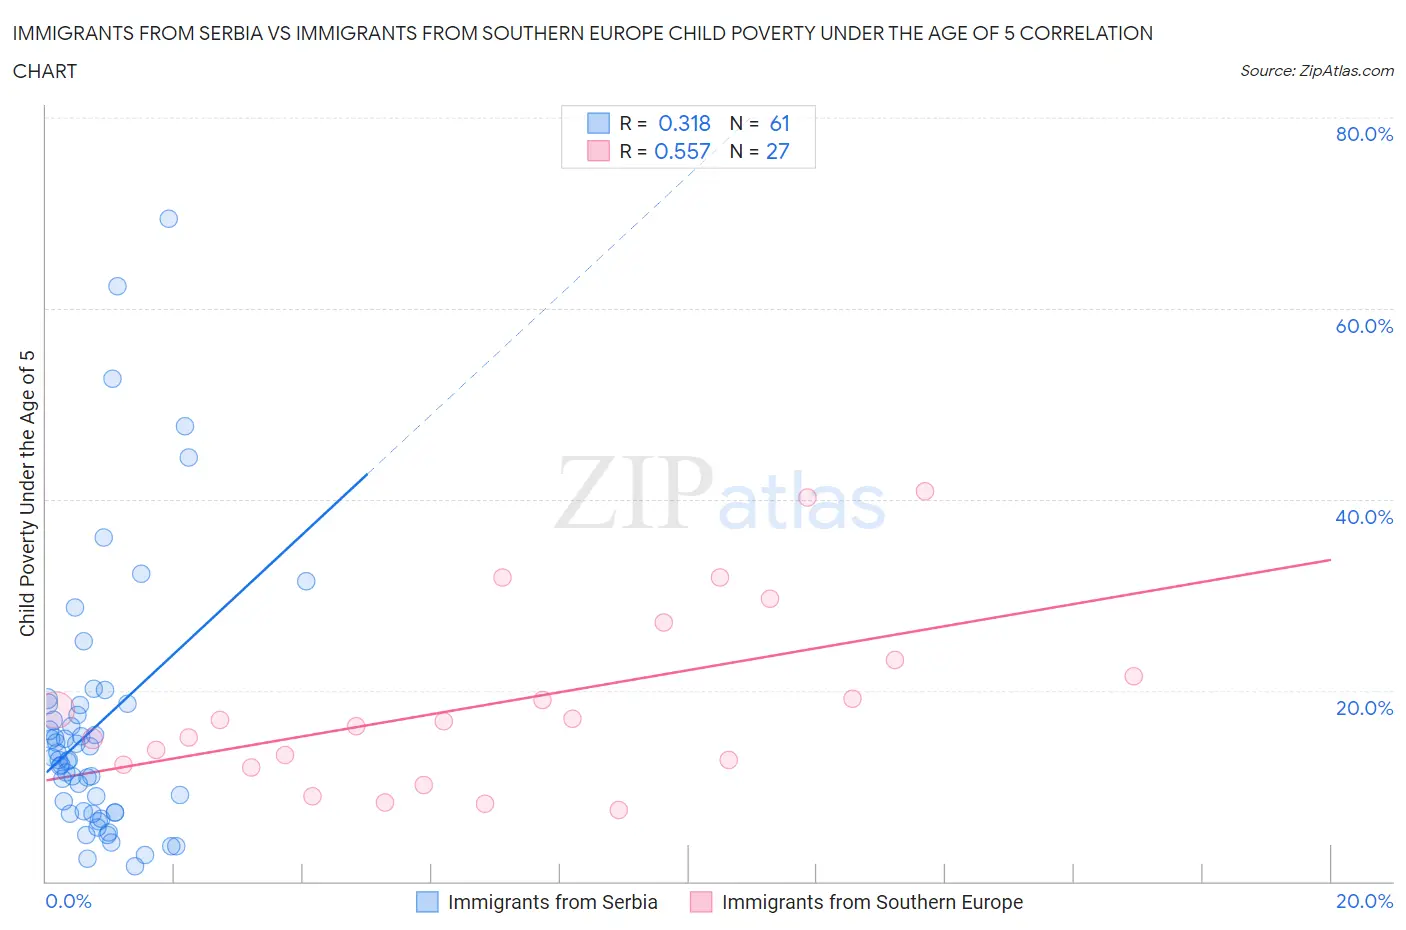 Immigrants from Serbia vs Immigrants from Southern Europe Child Poverty Under the Age of 5